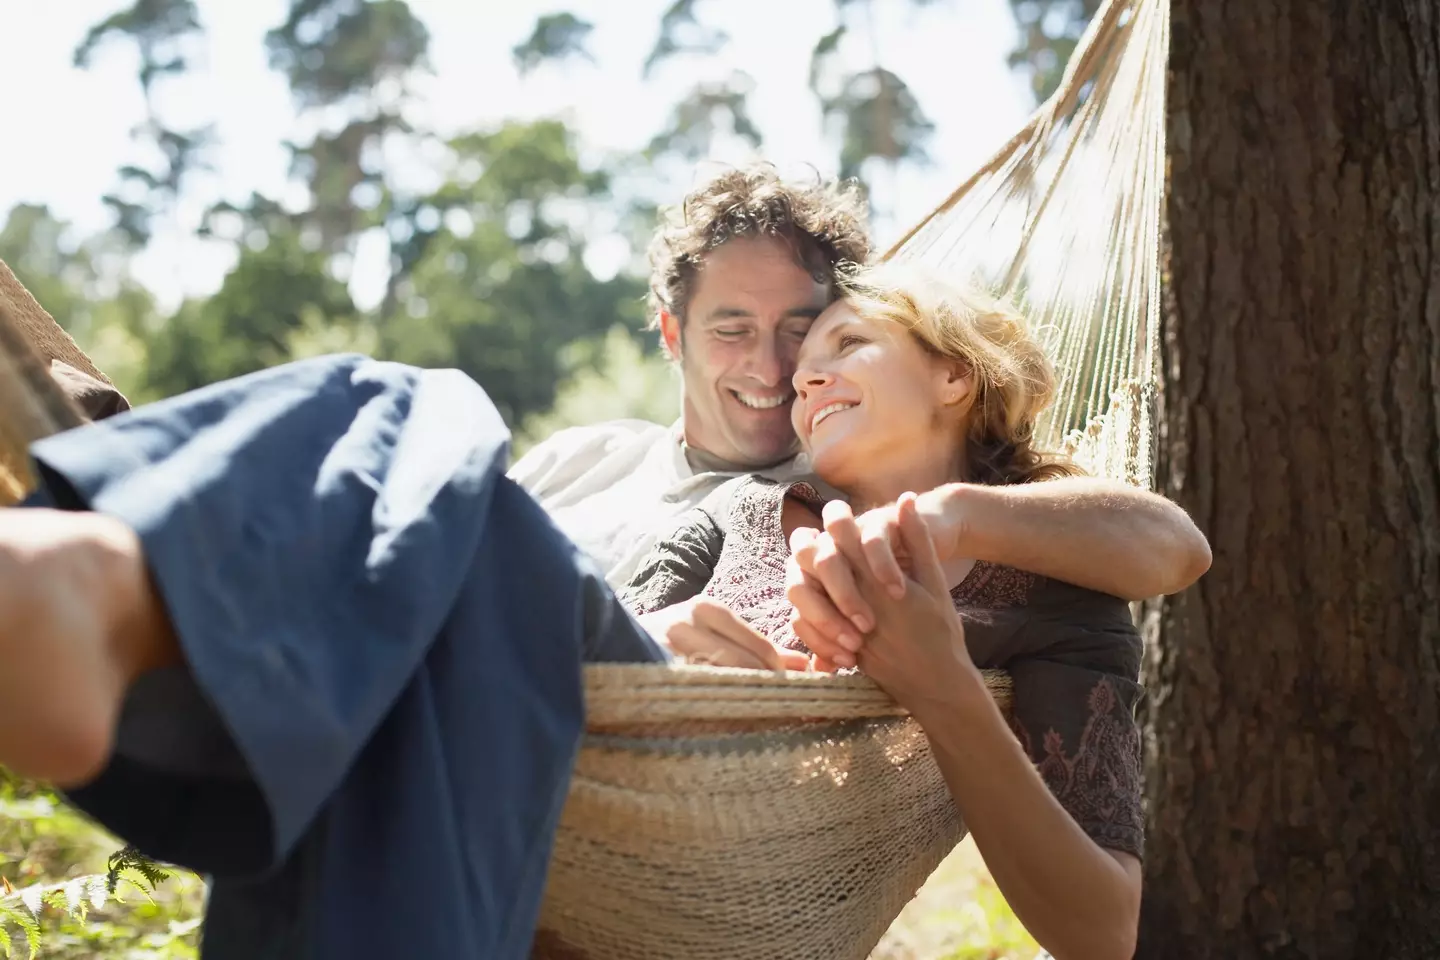 These tips will lead to a happier relationship (Paul Bradbury/Getty Images)